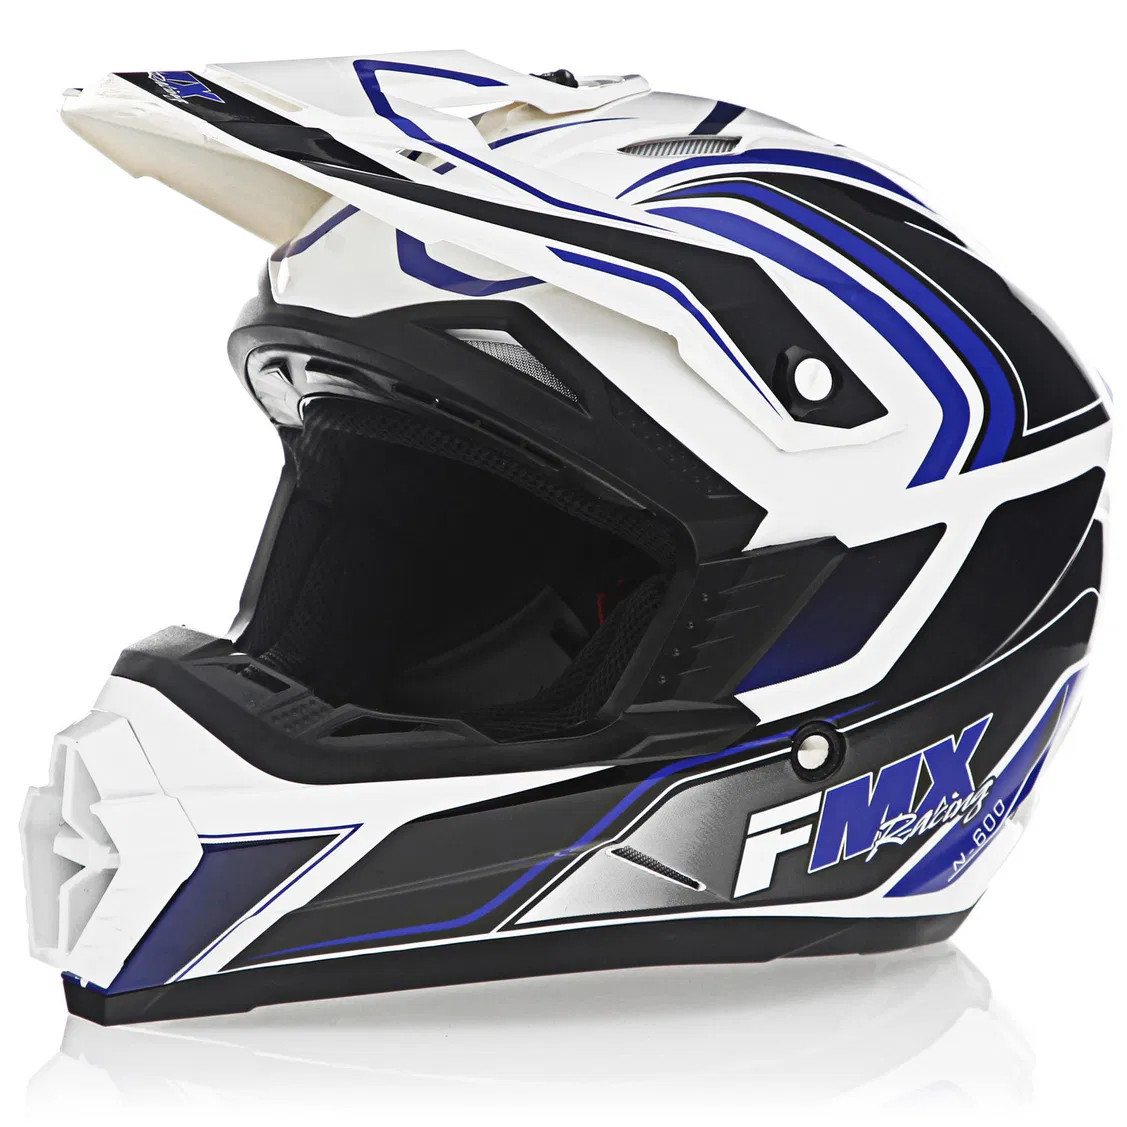 FMX N-600 Youth Small Motocross Helmet, White & Blue, Double D Closure, DOT - Click Image to Close